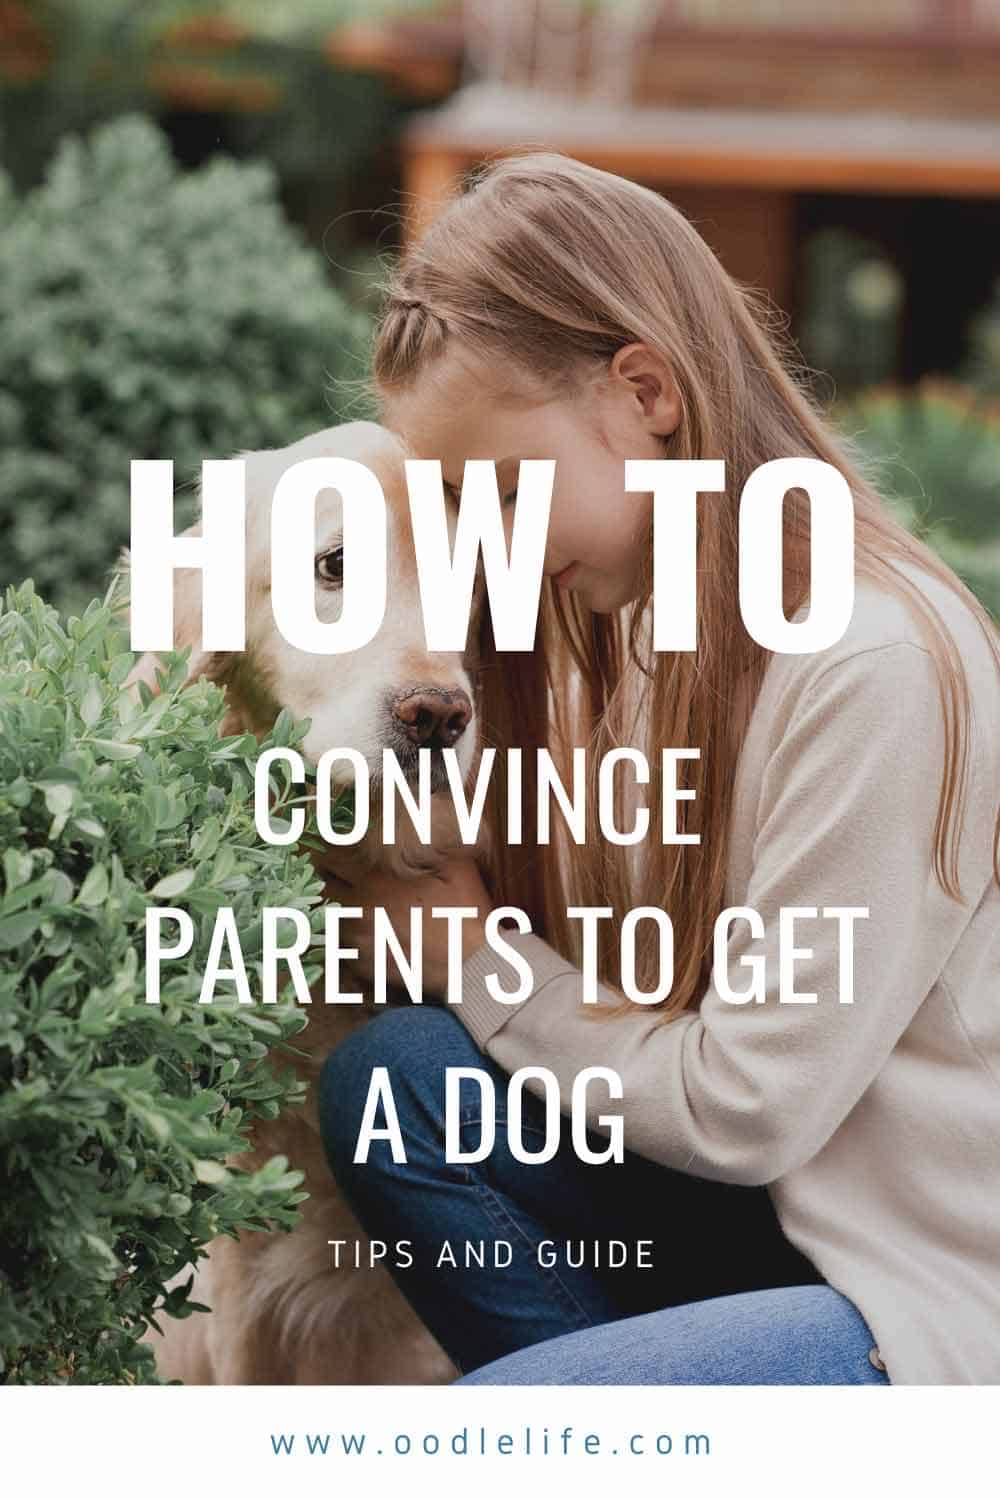 7 Tips on How To Convince Your Parents to Get a Dog